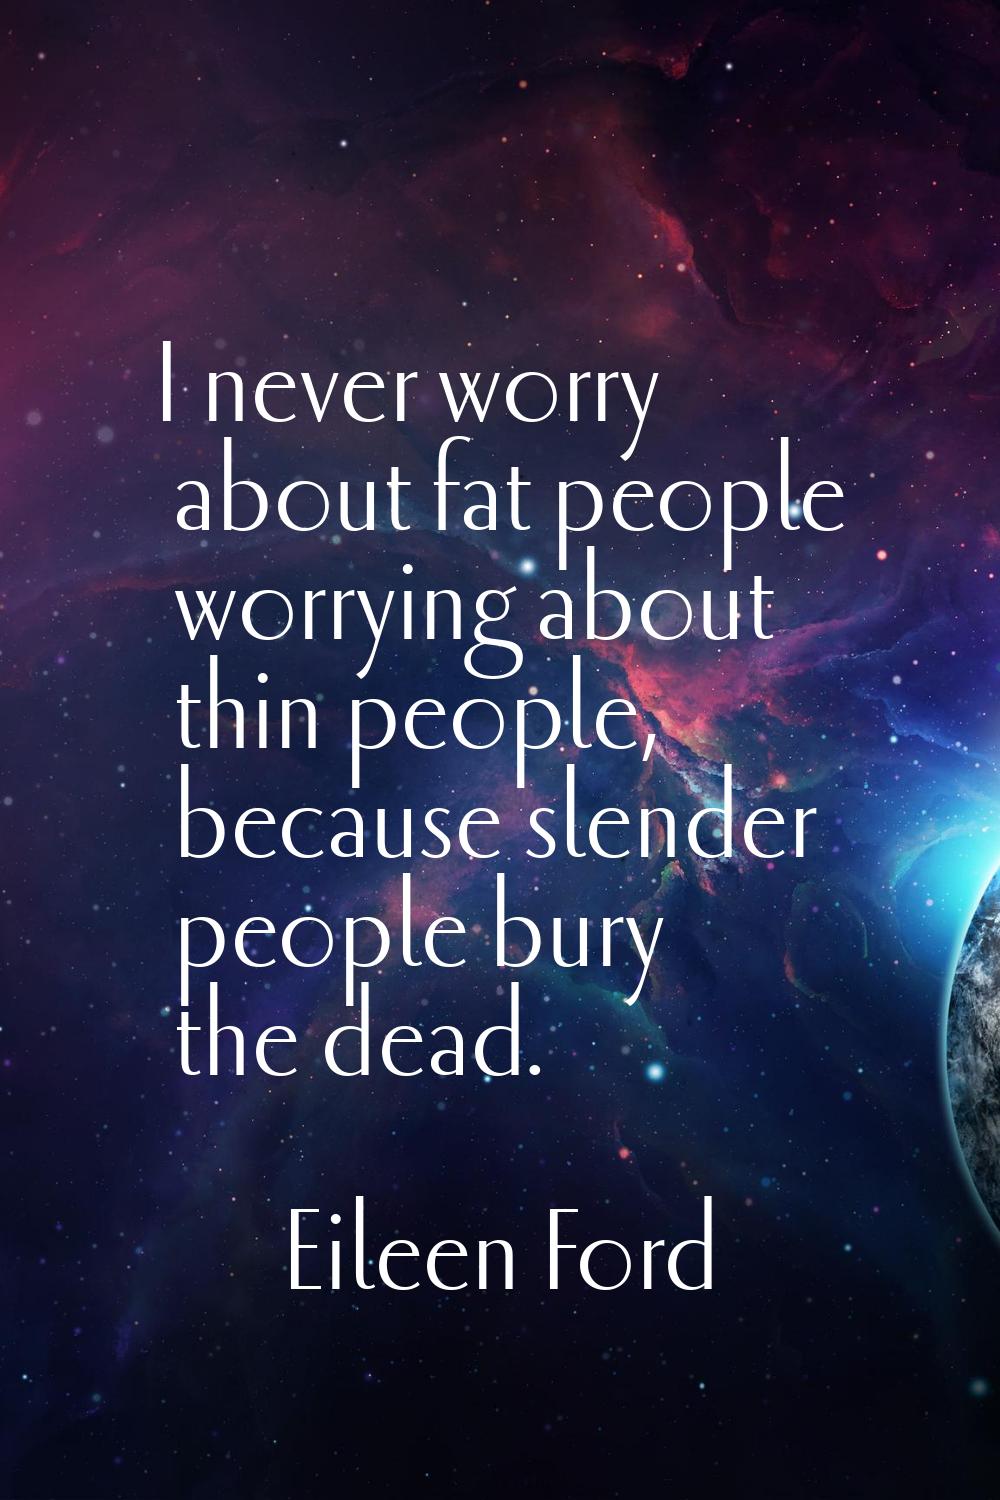 I never worry about fat people worrying about thin people, because slender people bury the dead.